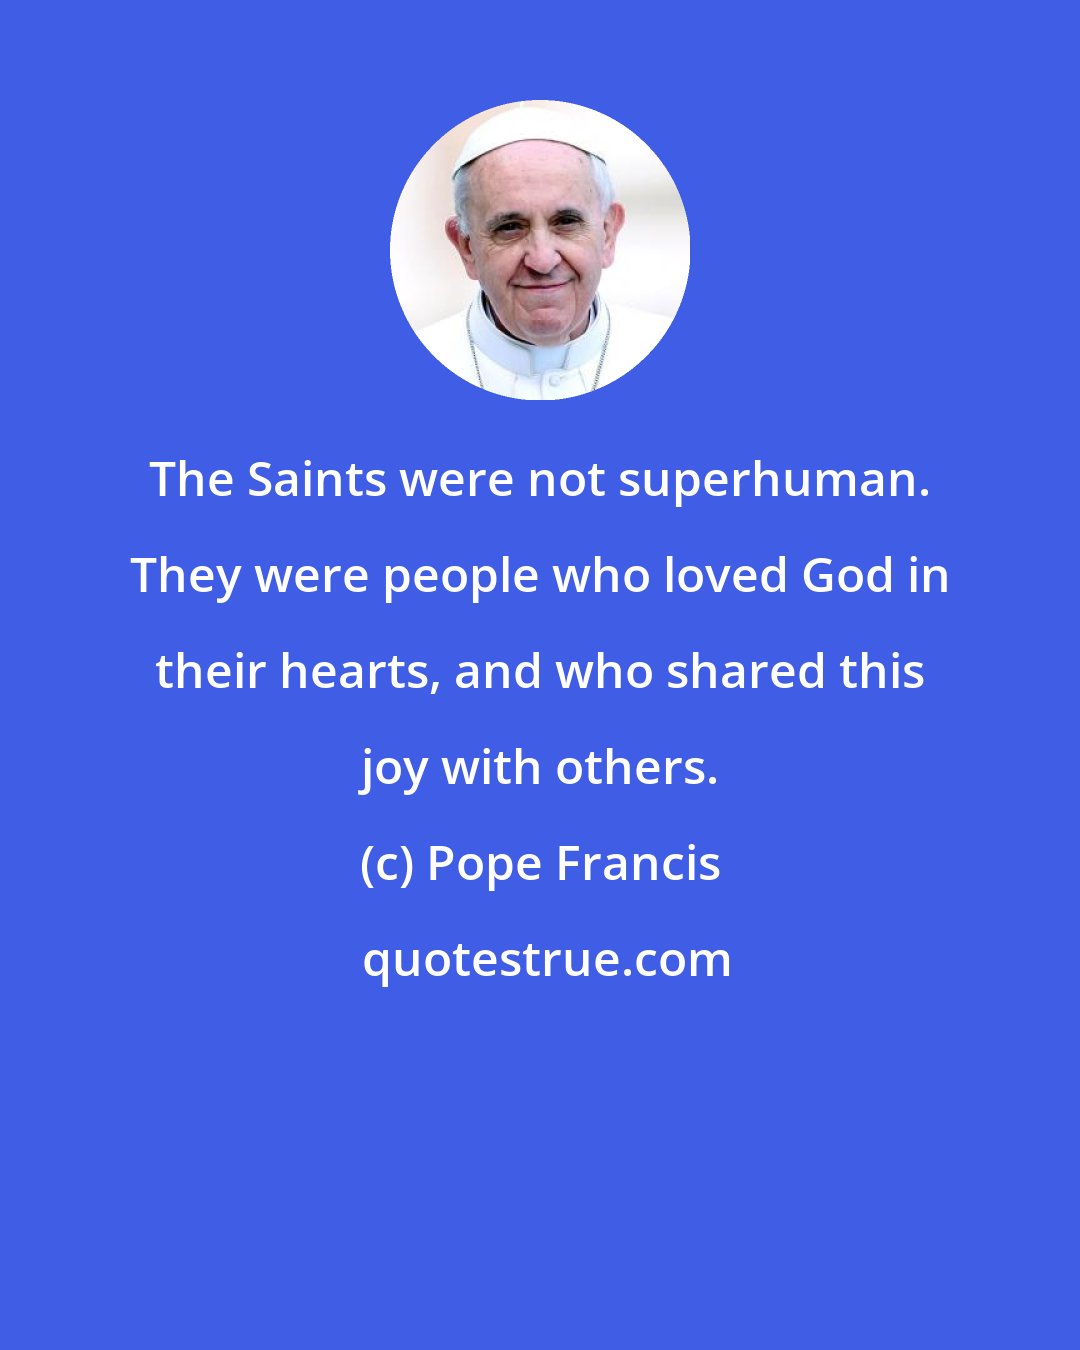 Pope Francis: The Saints were not superhuman. They were people who loved God in their hearts, and who shared this joy with others.